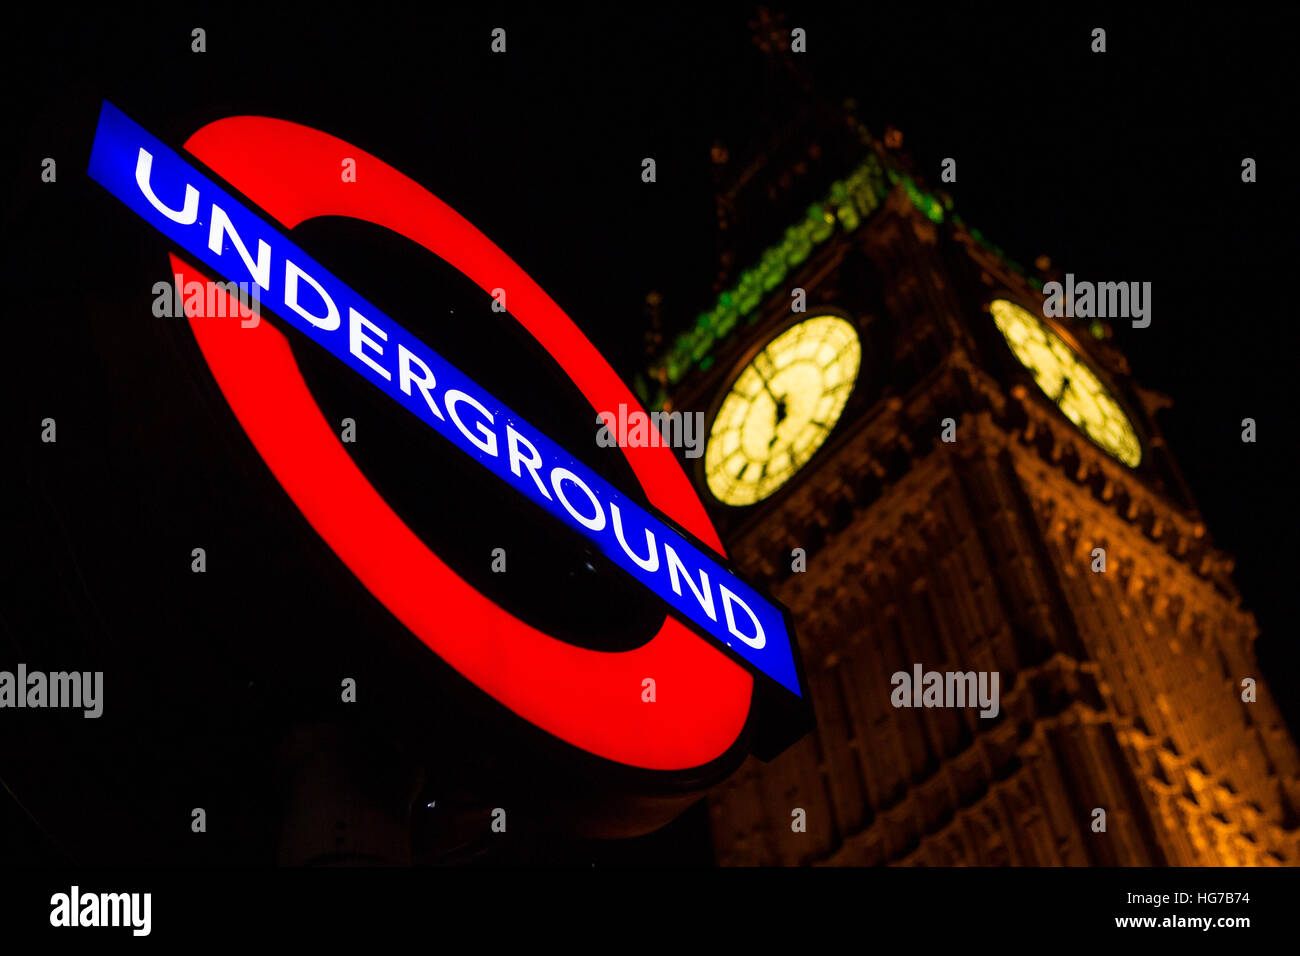 Illuminated London underground roundel tube station sign in the dark at night beside Big Ben and the palace of Westminster, Houses of Parliament Stock Photo